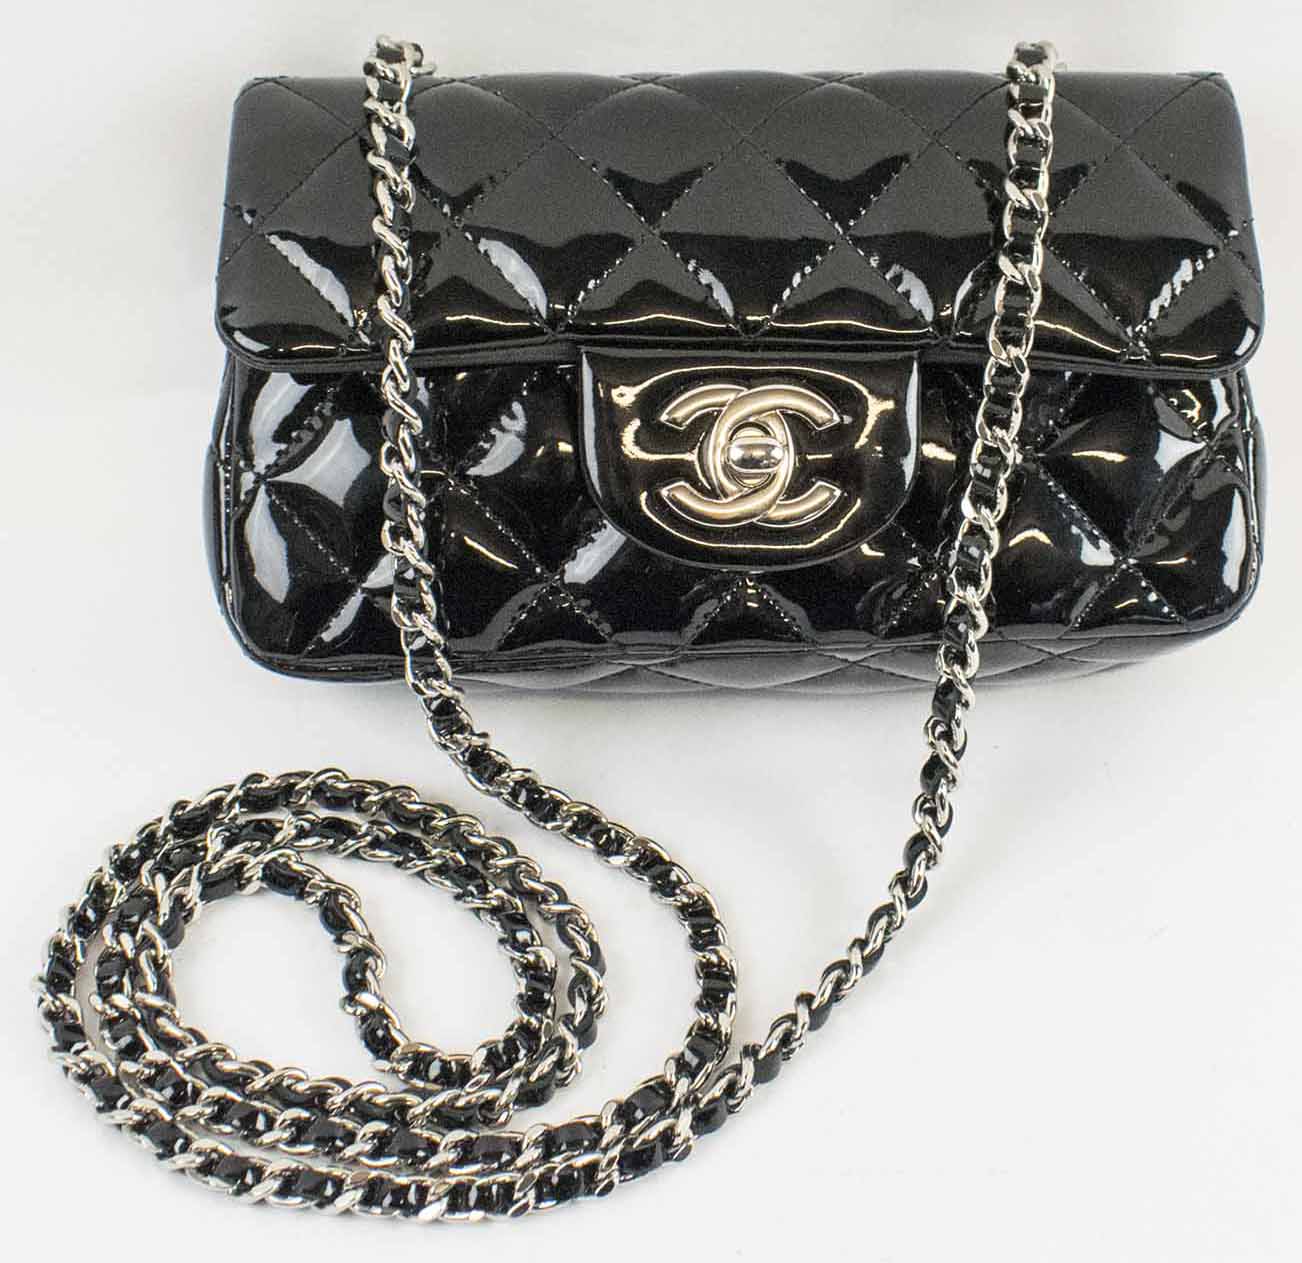 chanel bag patent leather